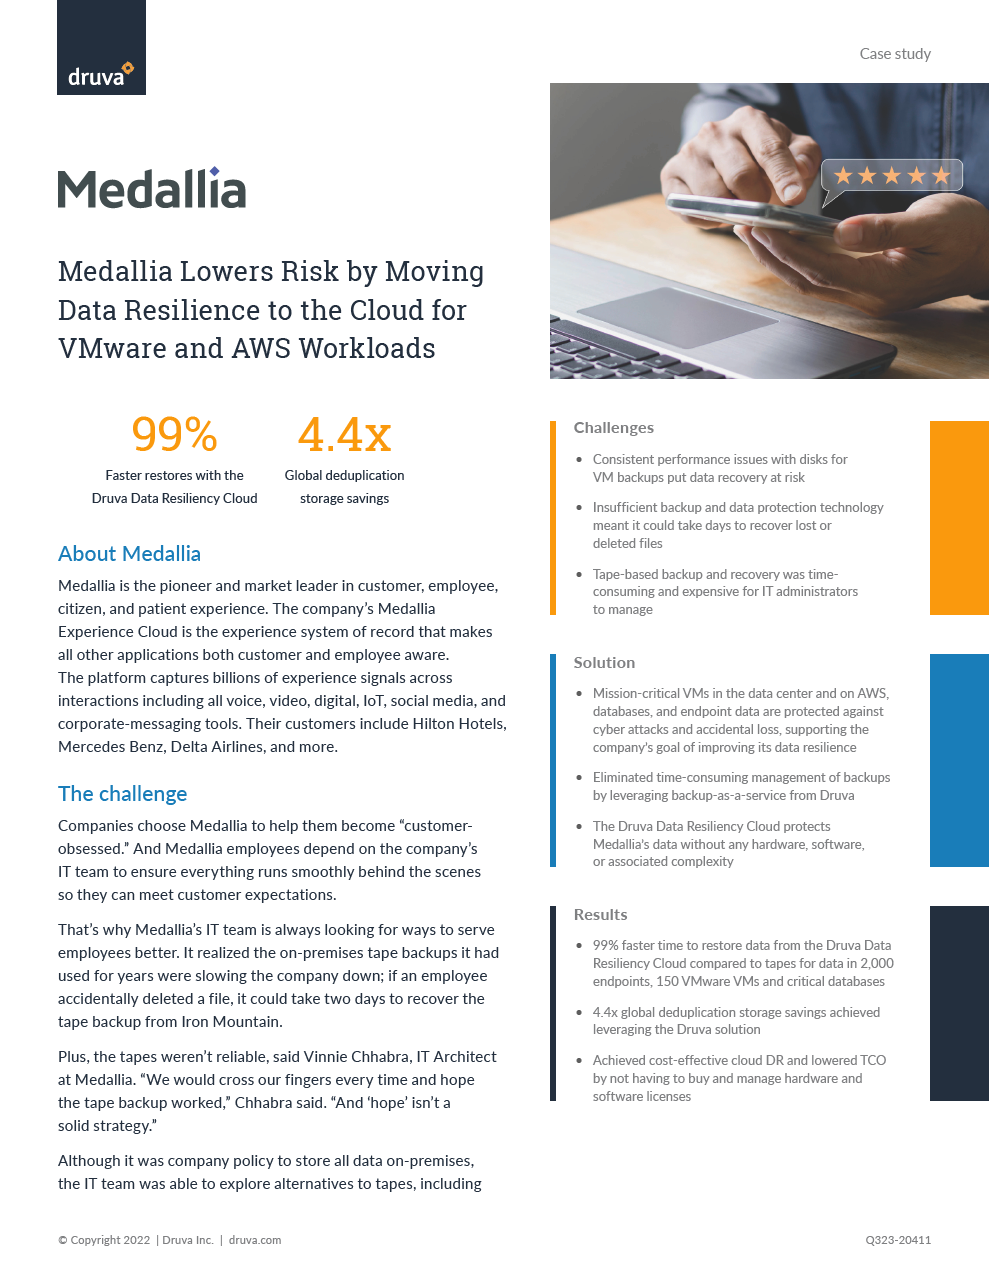 Medallia Moves Data Resilience to the Cloud for VMware and AWS